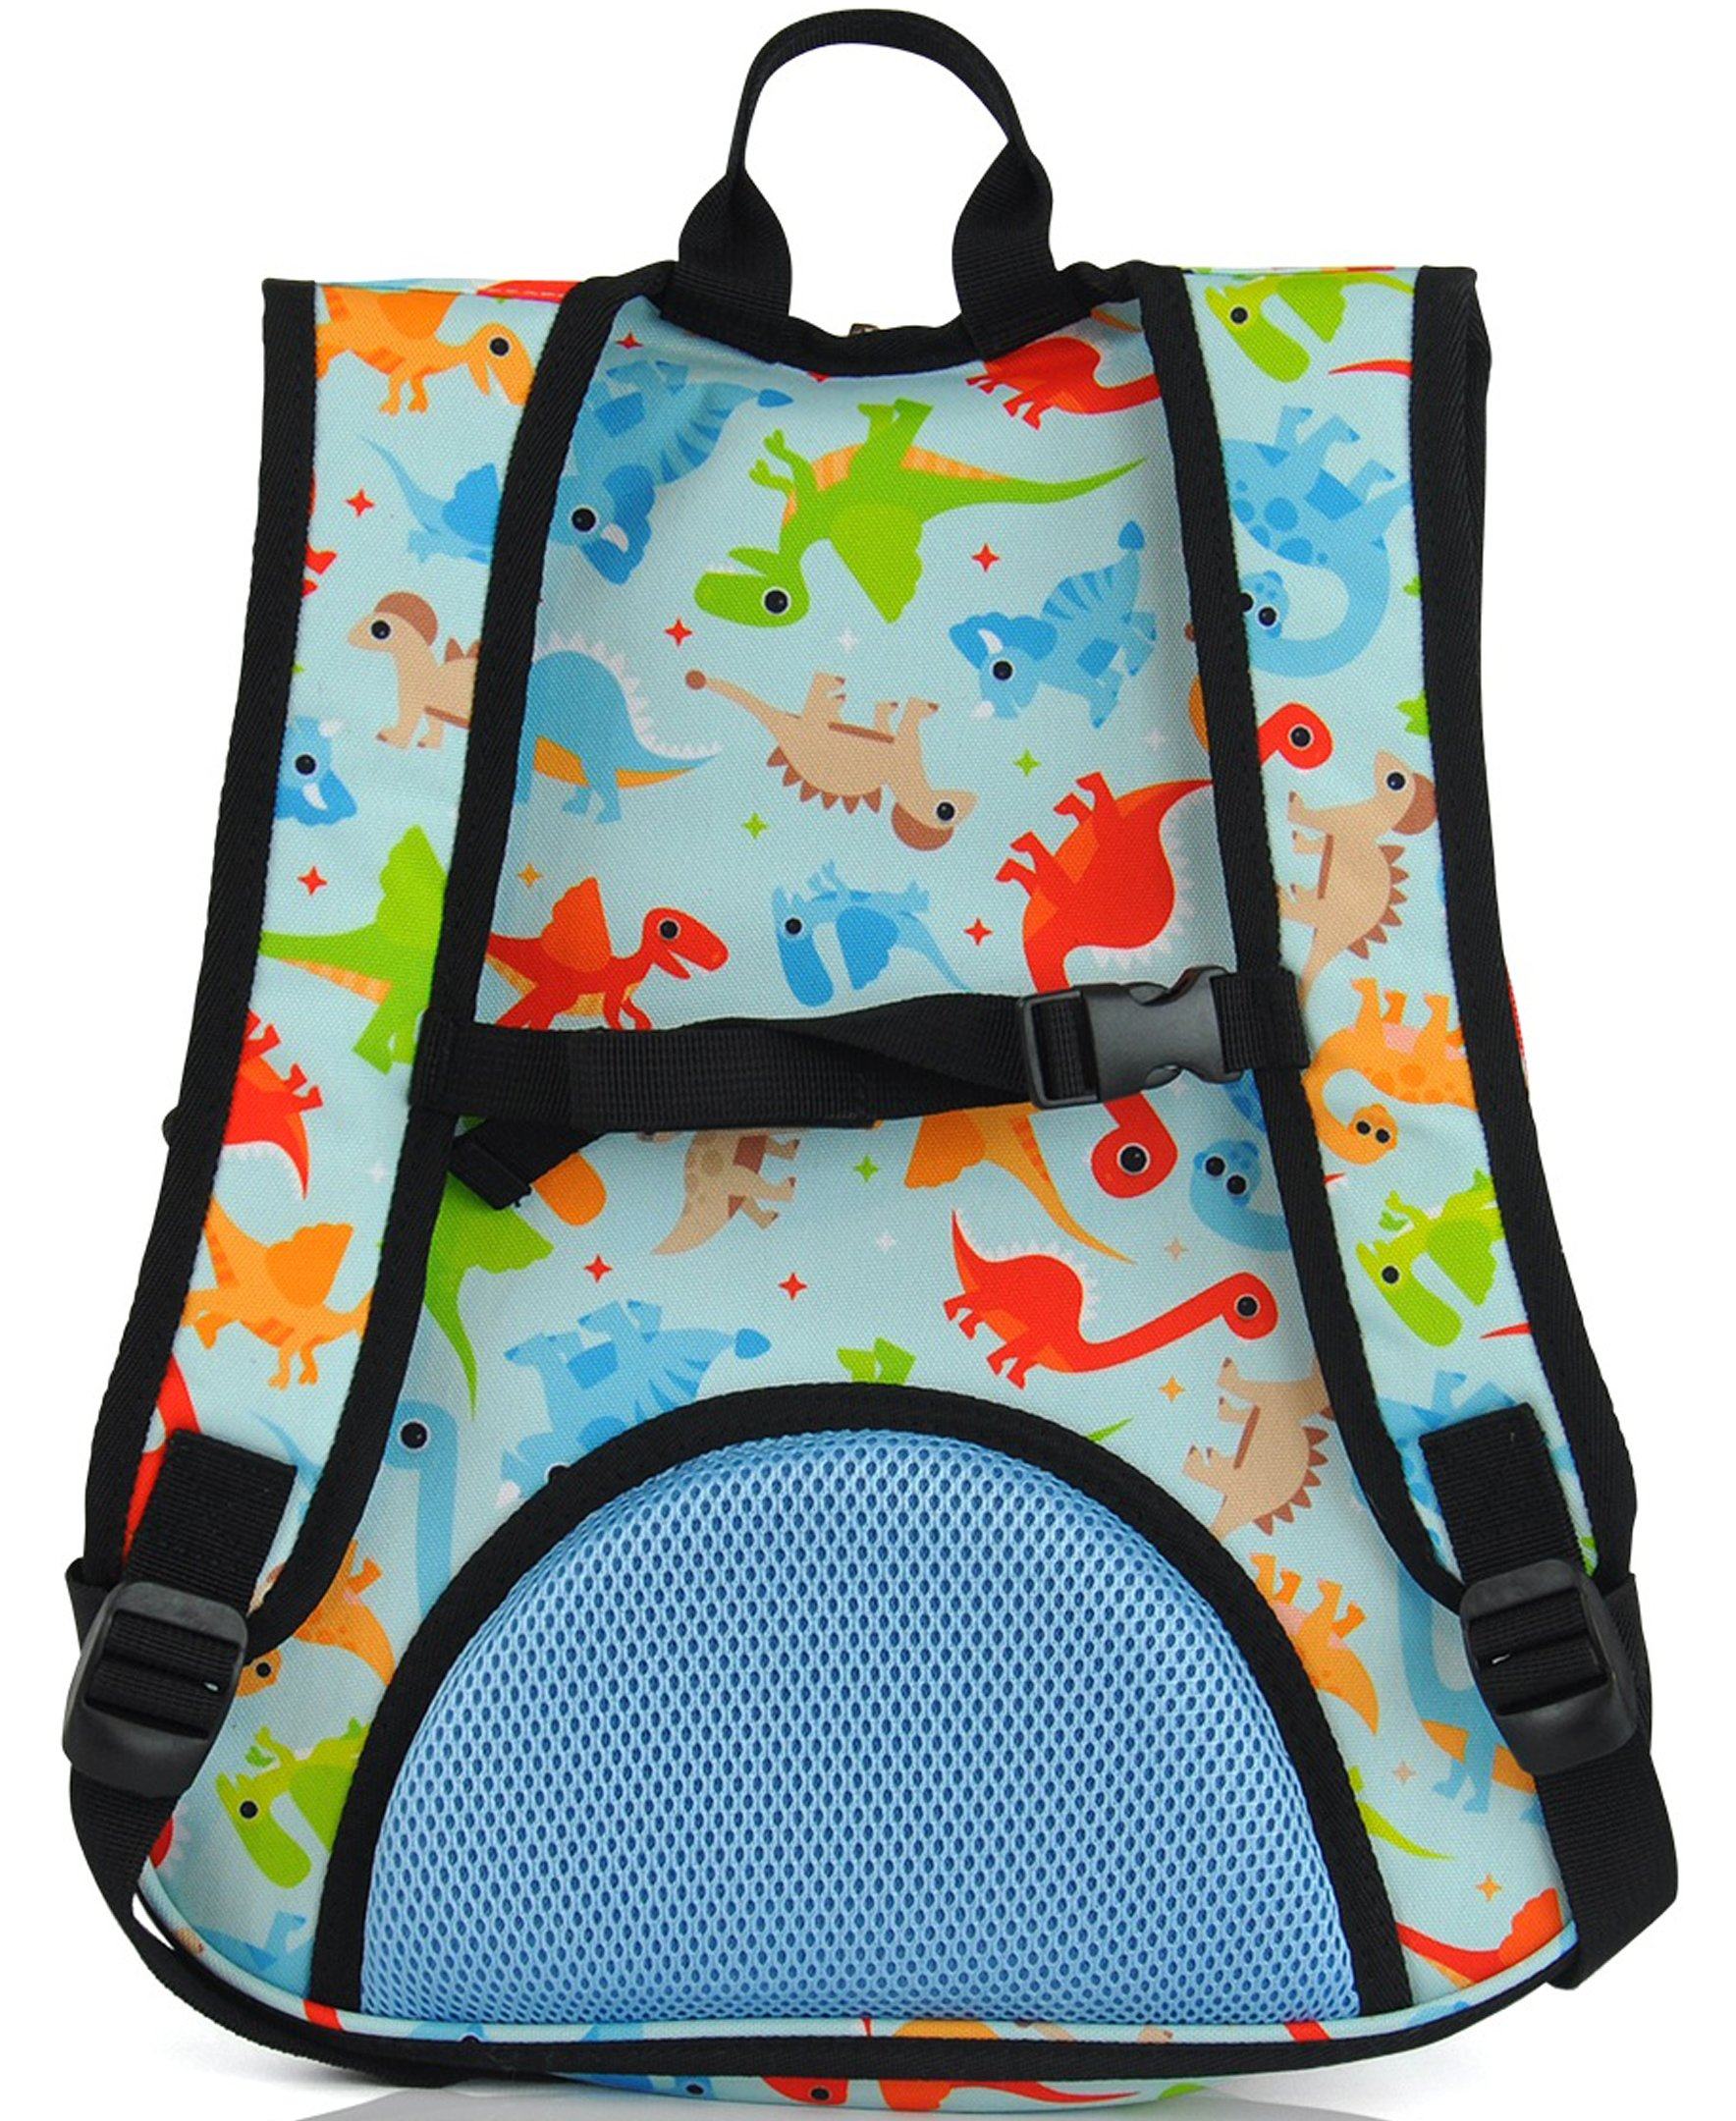 O3KCBP018 Obersee Mini Preschool All-in-One Backpack for Toddlers and Kids with integrated Insulated Cooler | Dinosaur - image 2 of 5